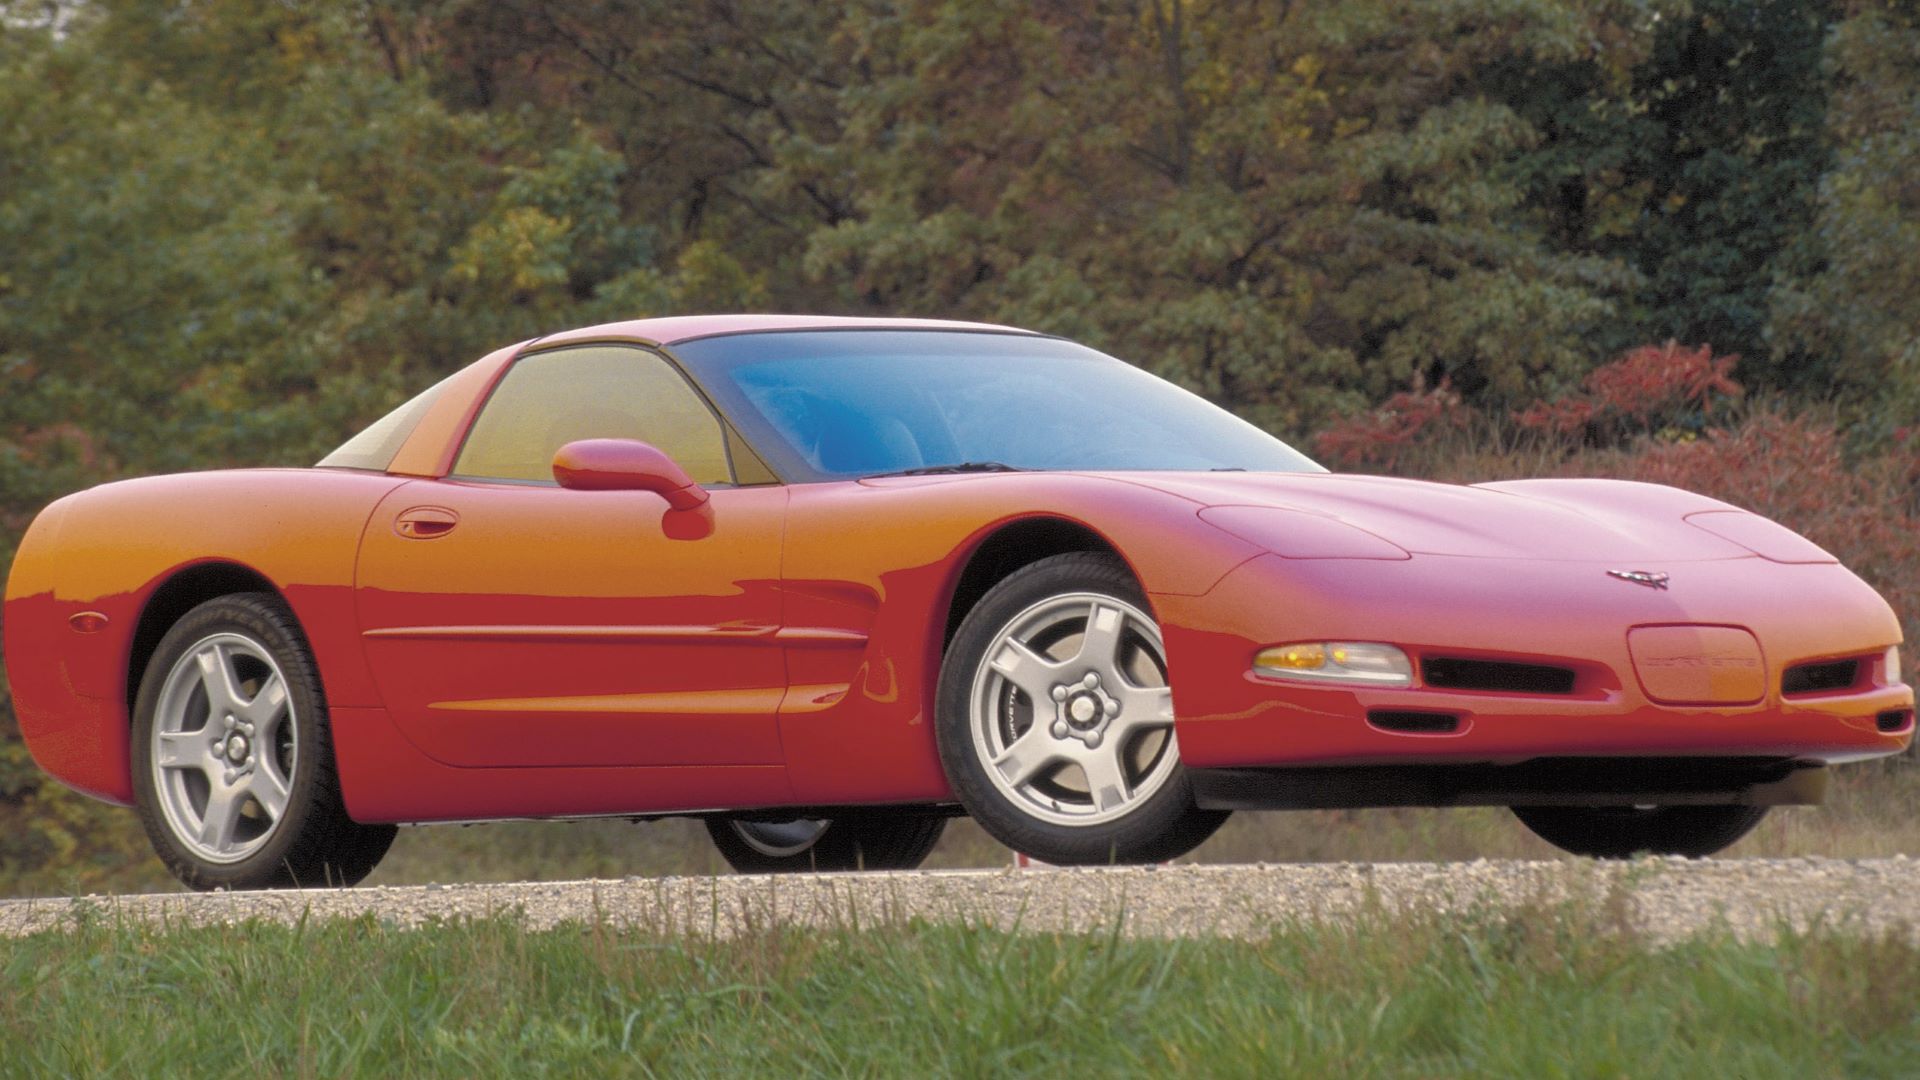 What year is the c5 corvette